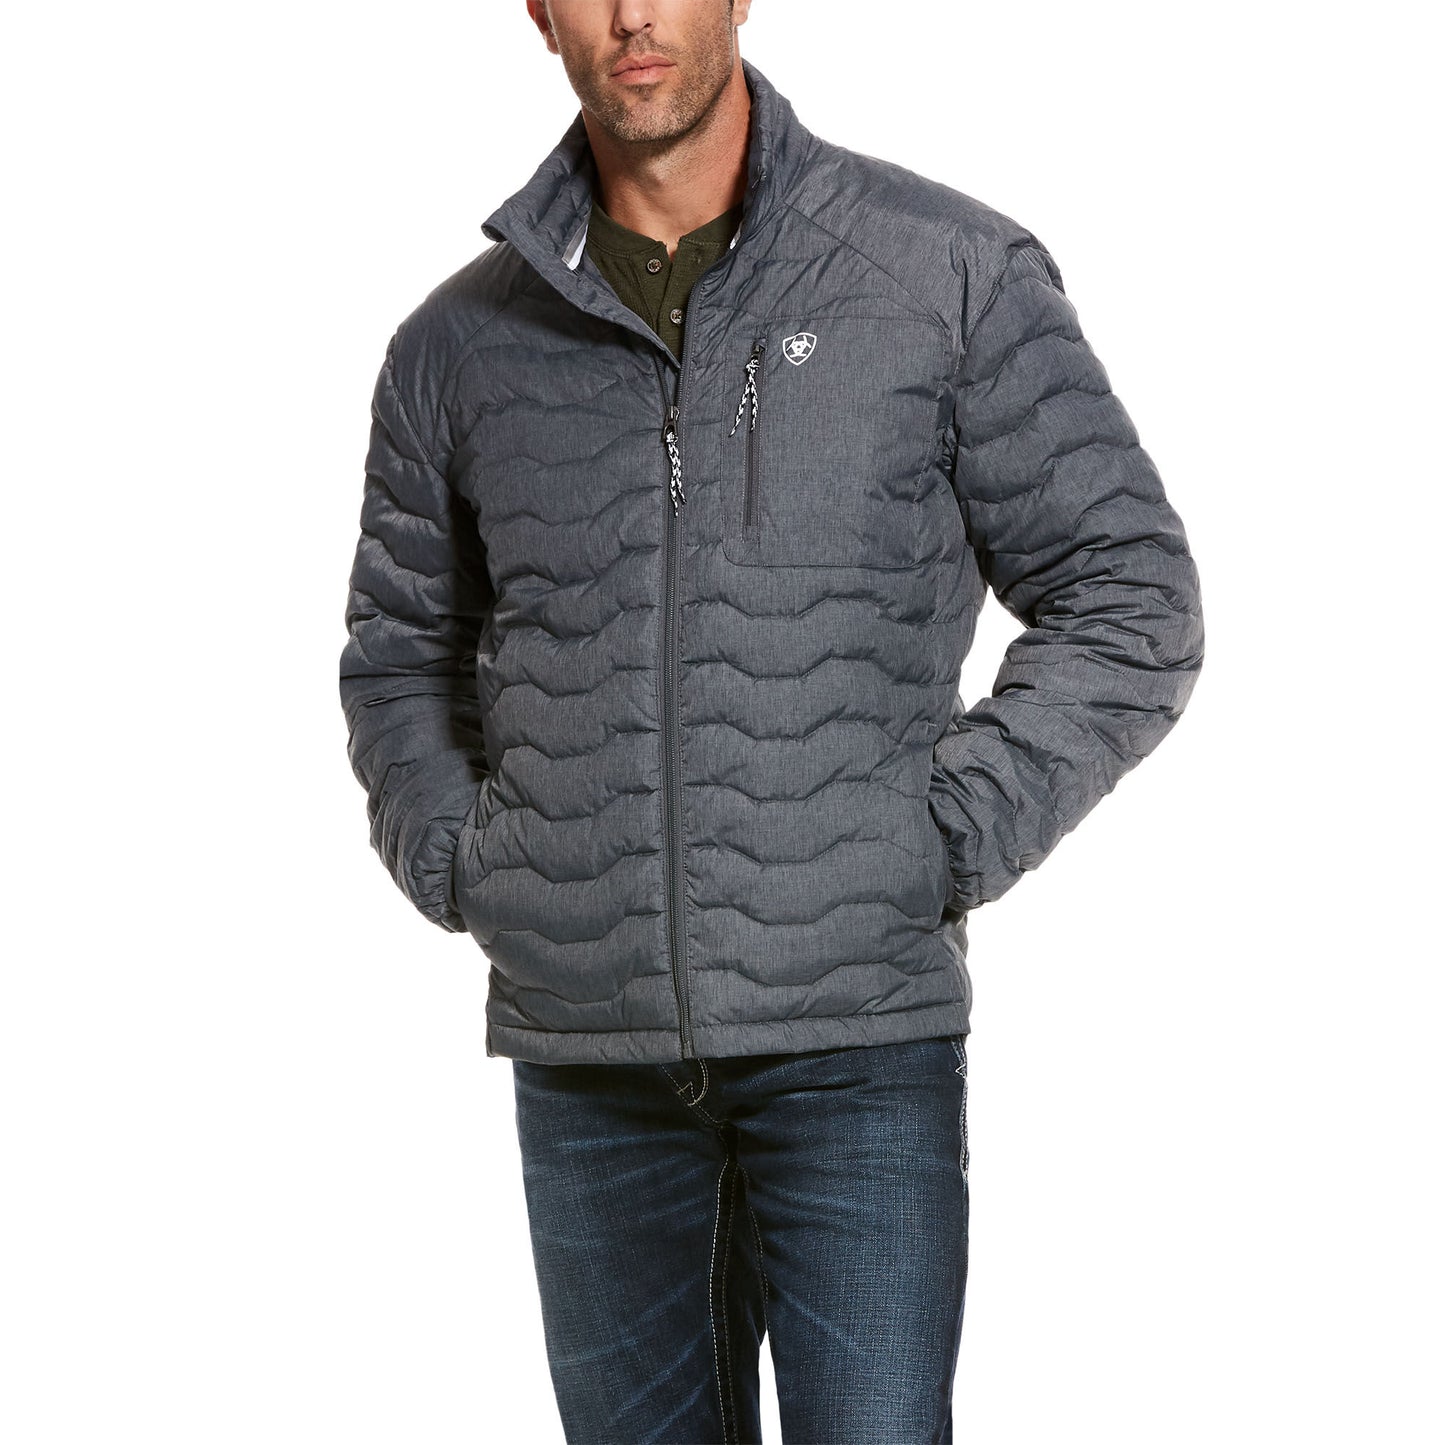 Men’s Ariat Ideal 3.0 Down Insulated Jacket